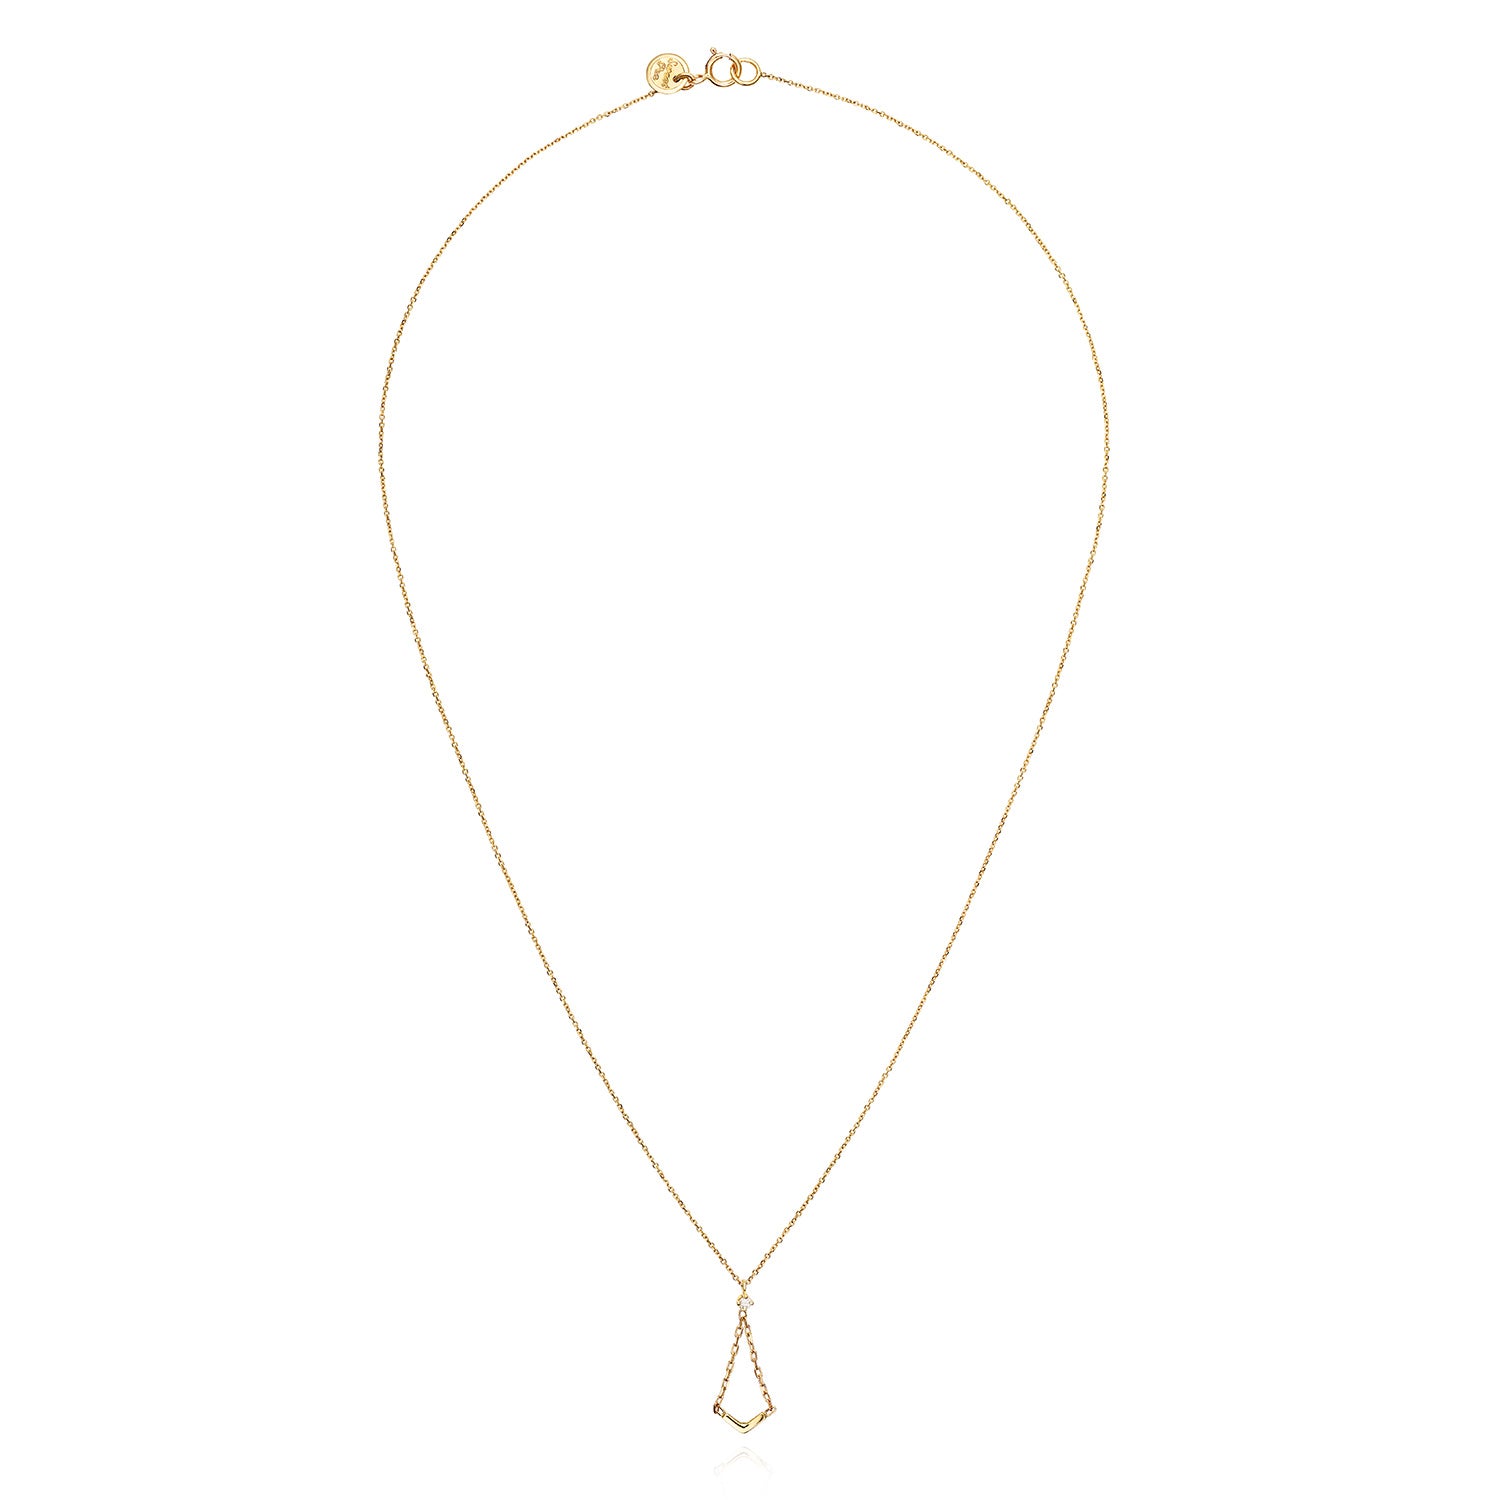 18ct yellow gold necklace with diamond and small V-shaped charm  